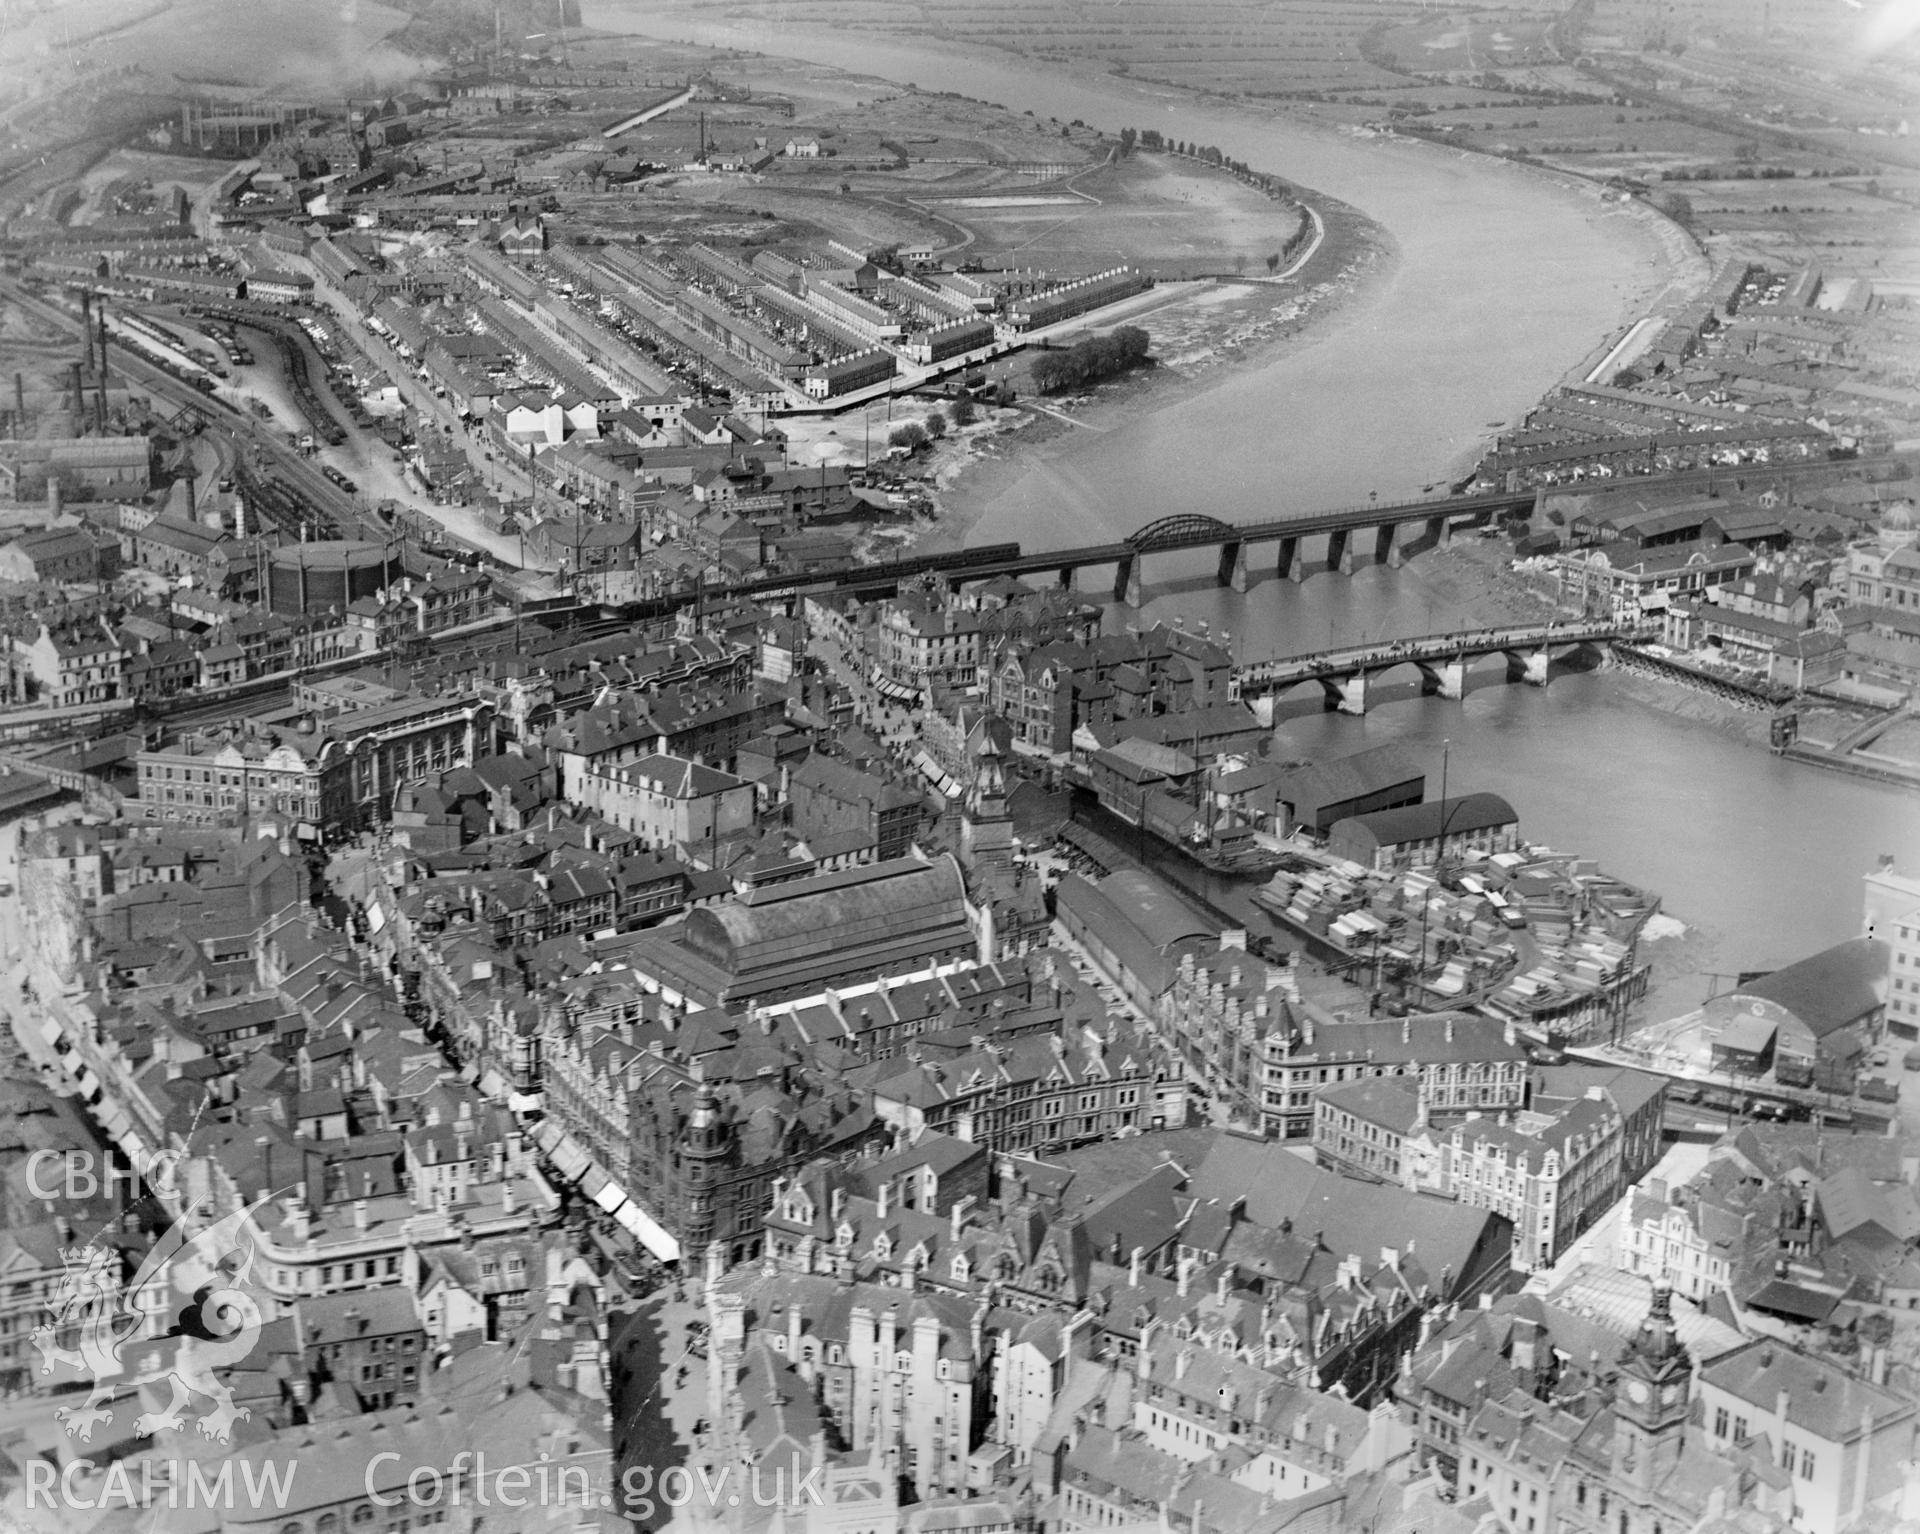 View of Newport showing bridges and river, oblique aerial view. 5?x4? black and white glass plate negative.